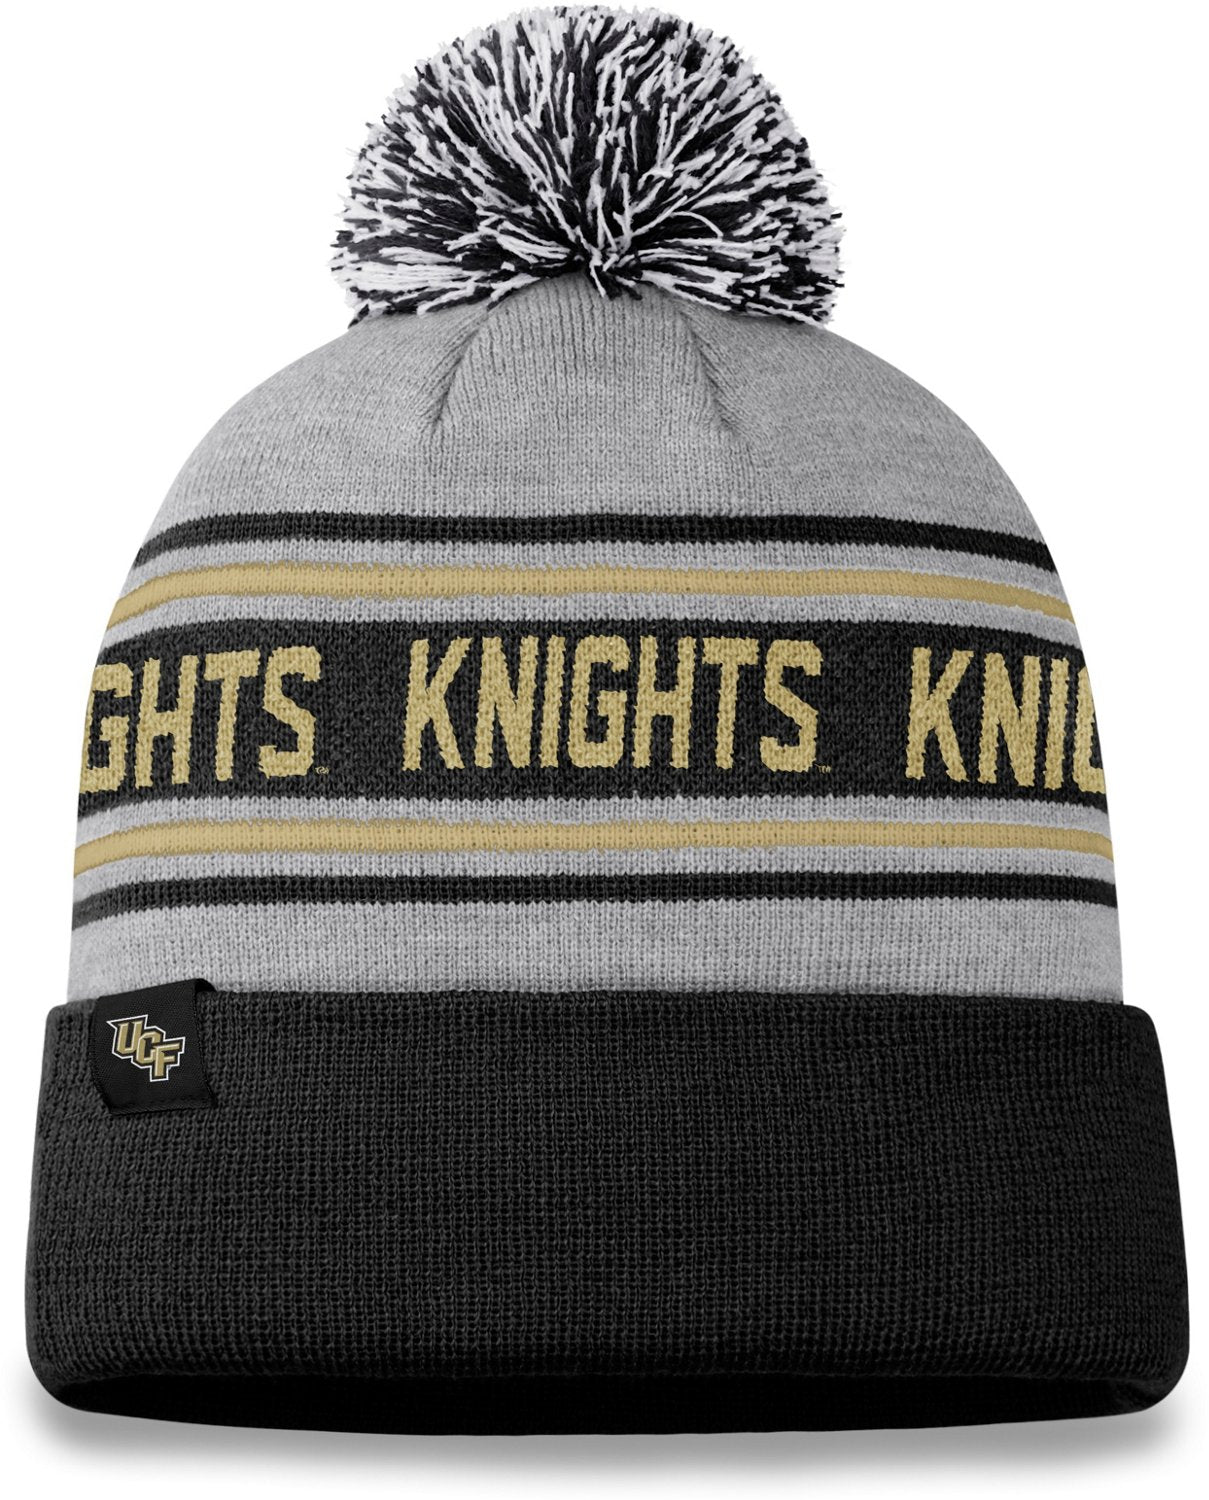 University of Central Florida Knights Heather Gray Top of the World Frigid Cuffed Knit Hat with Pom